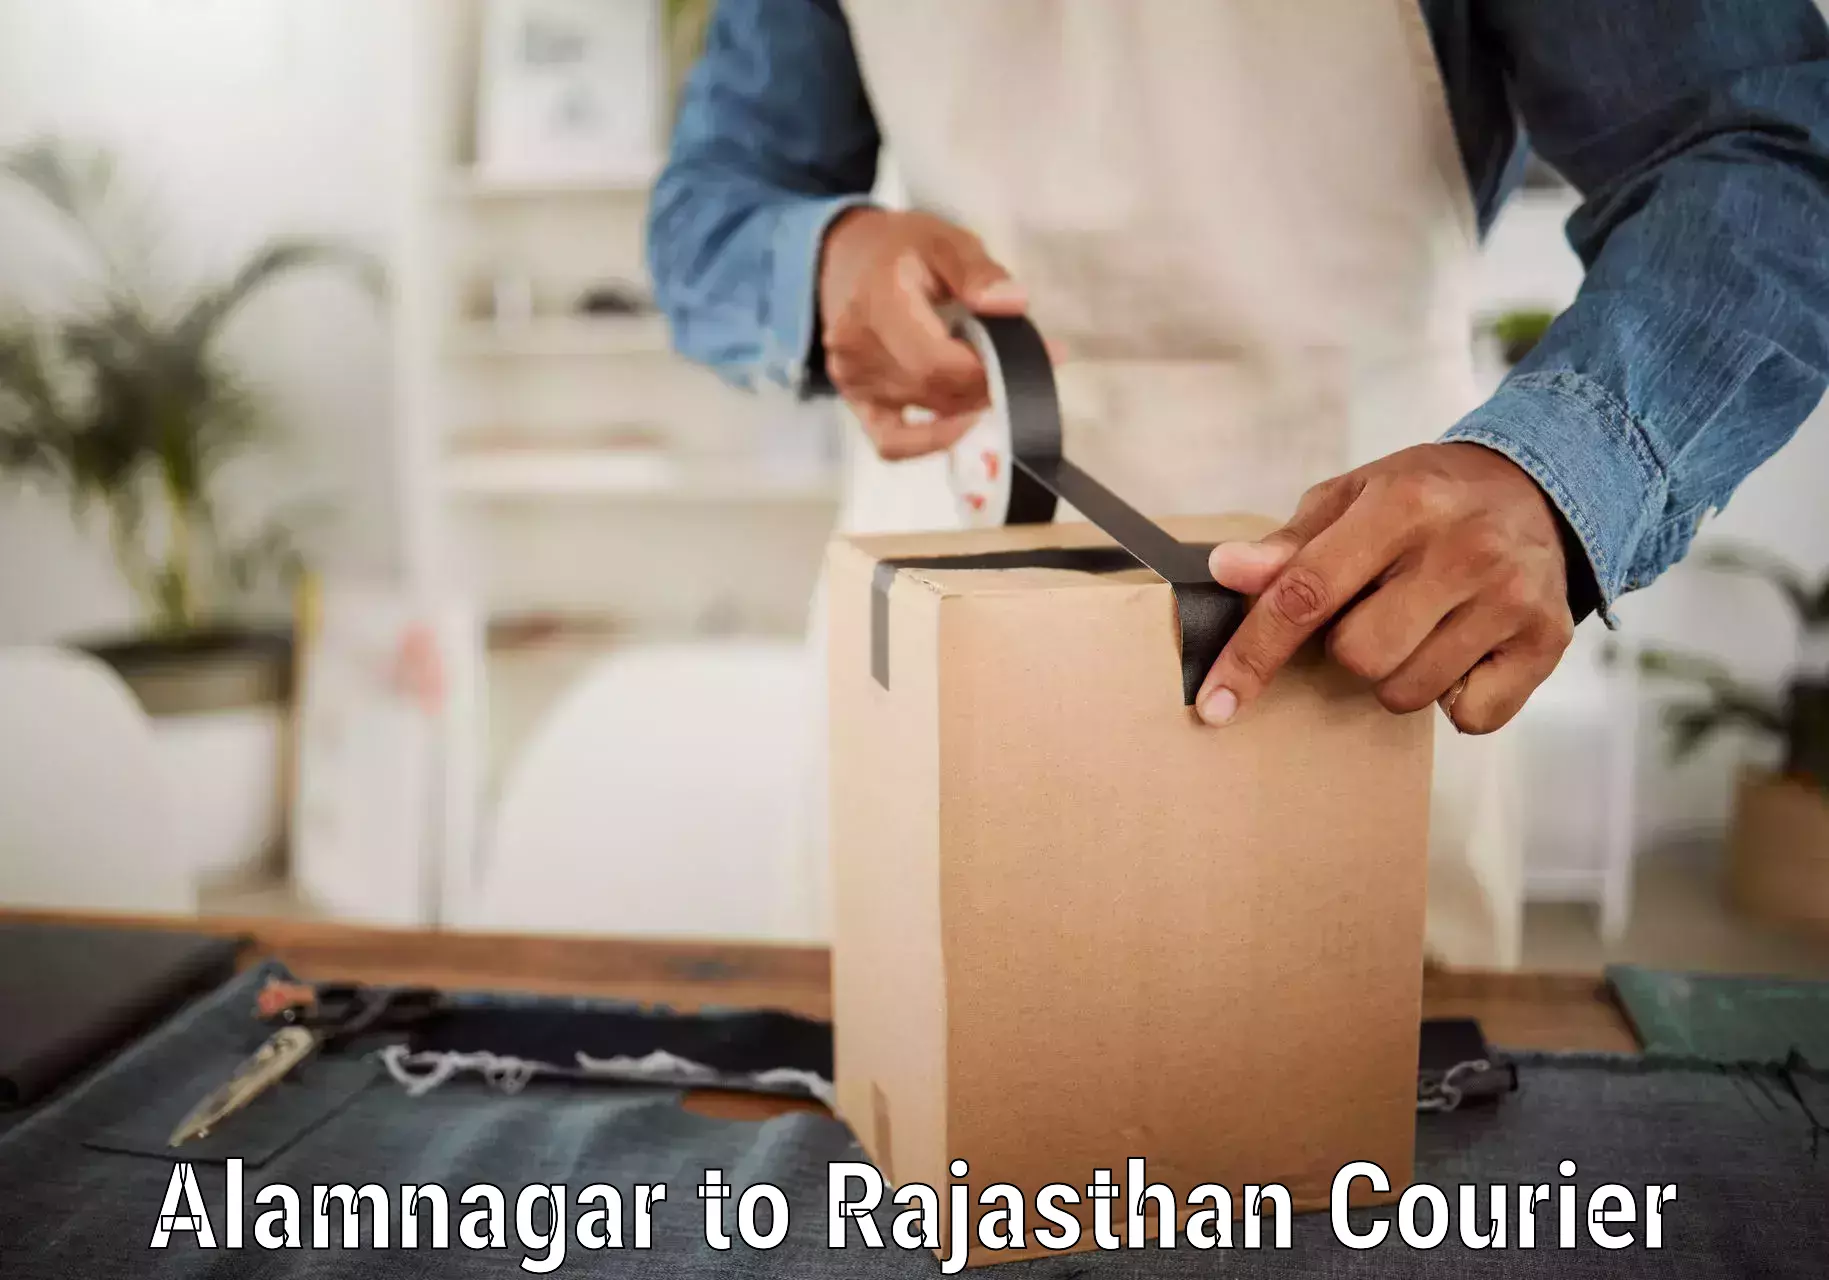 Efficient package consolidation Alamnagar to Sikar